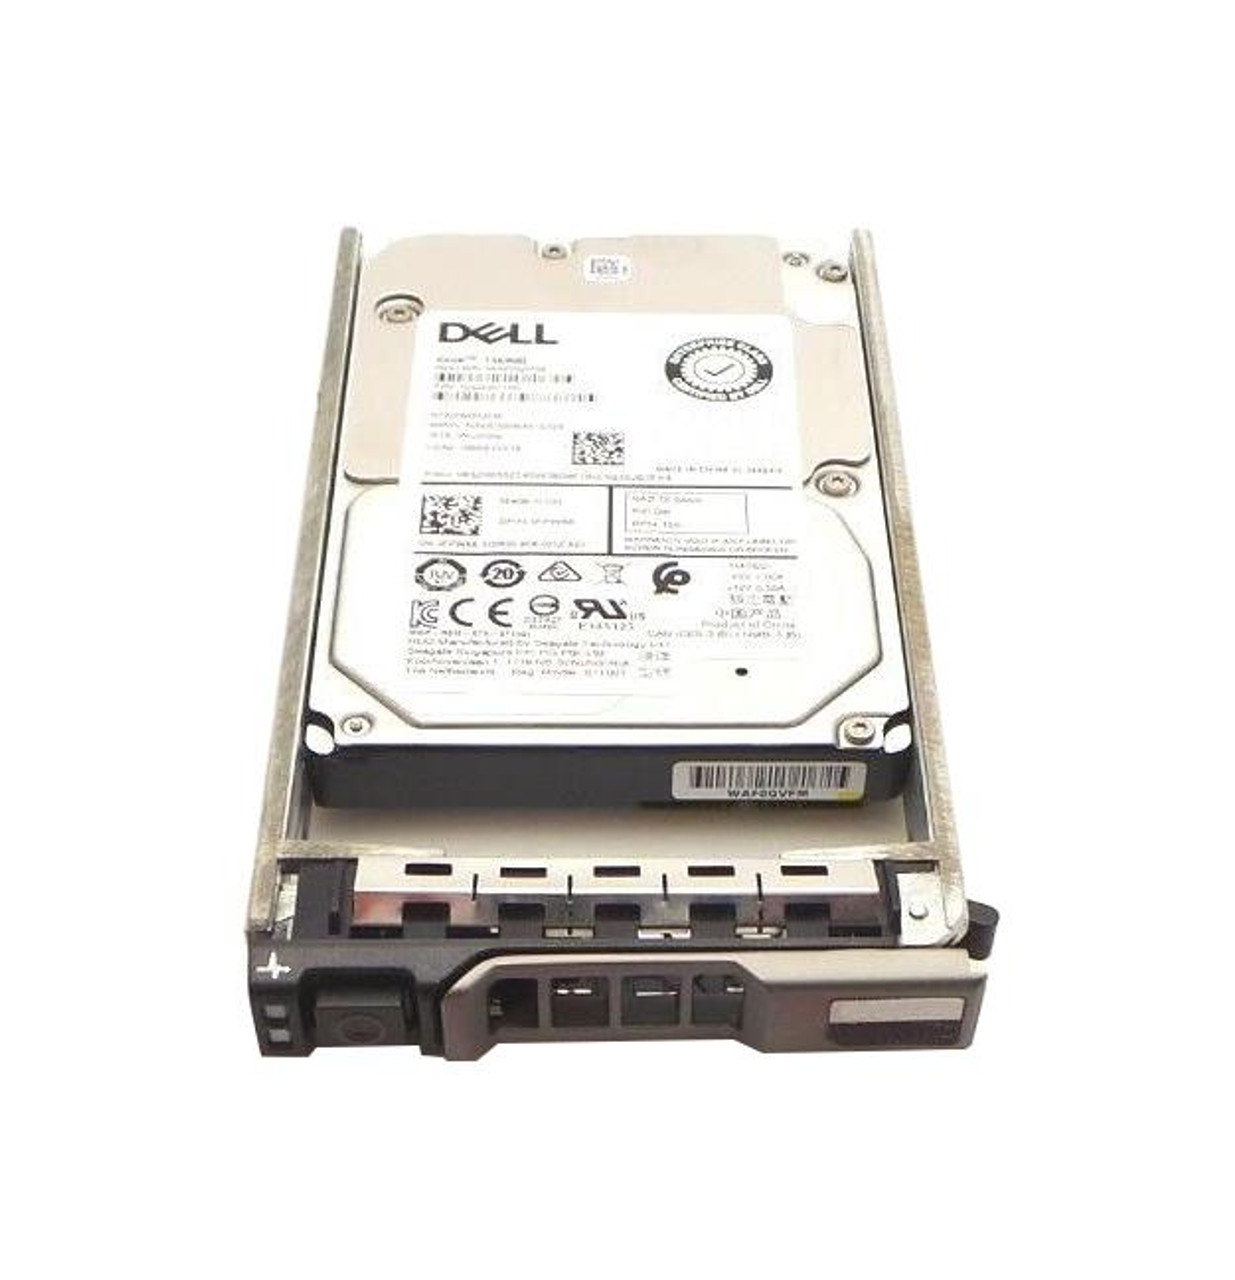 0M21K6 Dell 2.4TB 10000RPM SAS 12Gbps Hot Swap 256MB Cache (FIPS 140 SED / 4Kn) 2.5-inch Internal Hard Drive with Tray